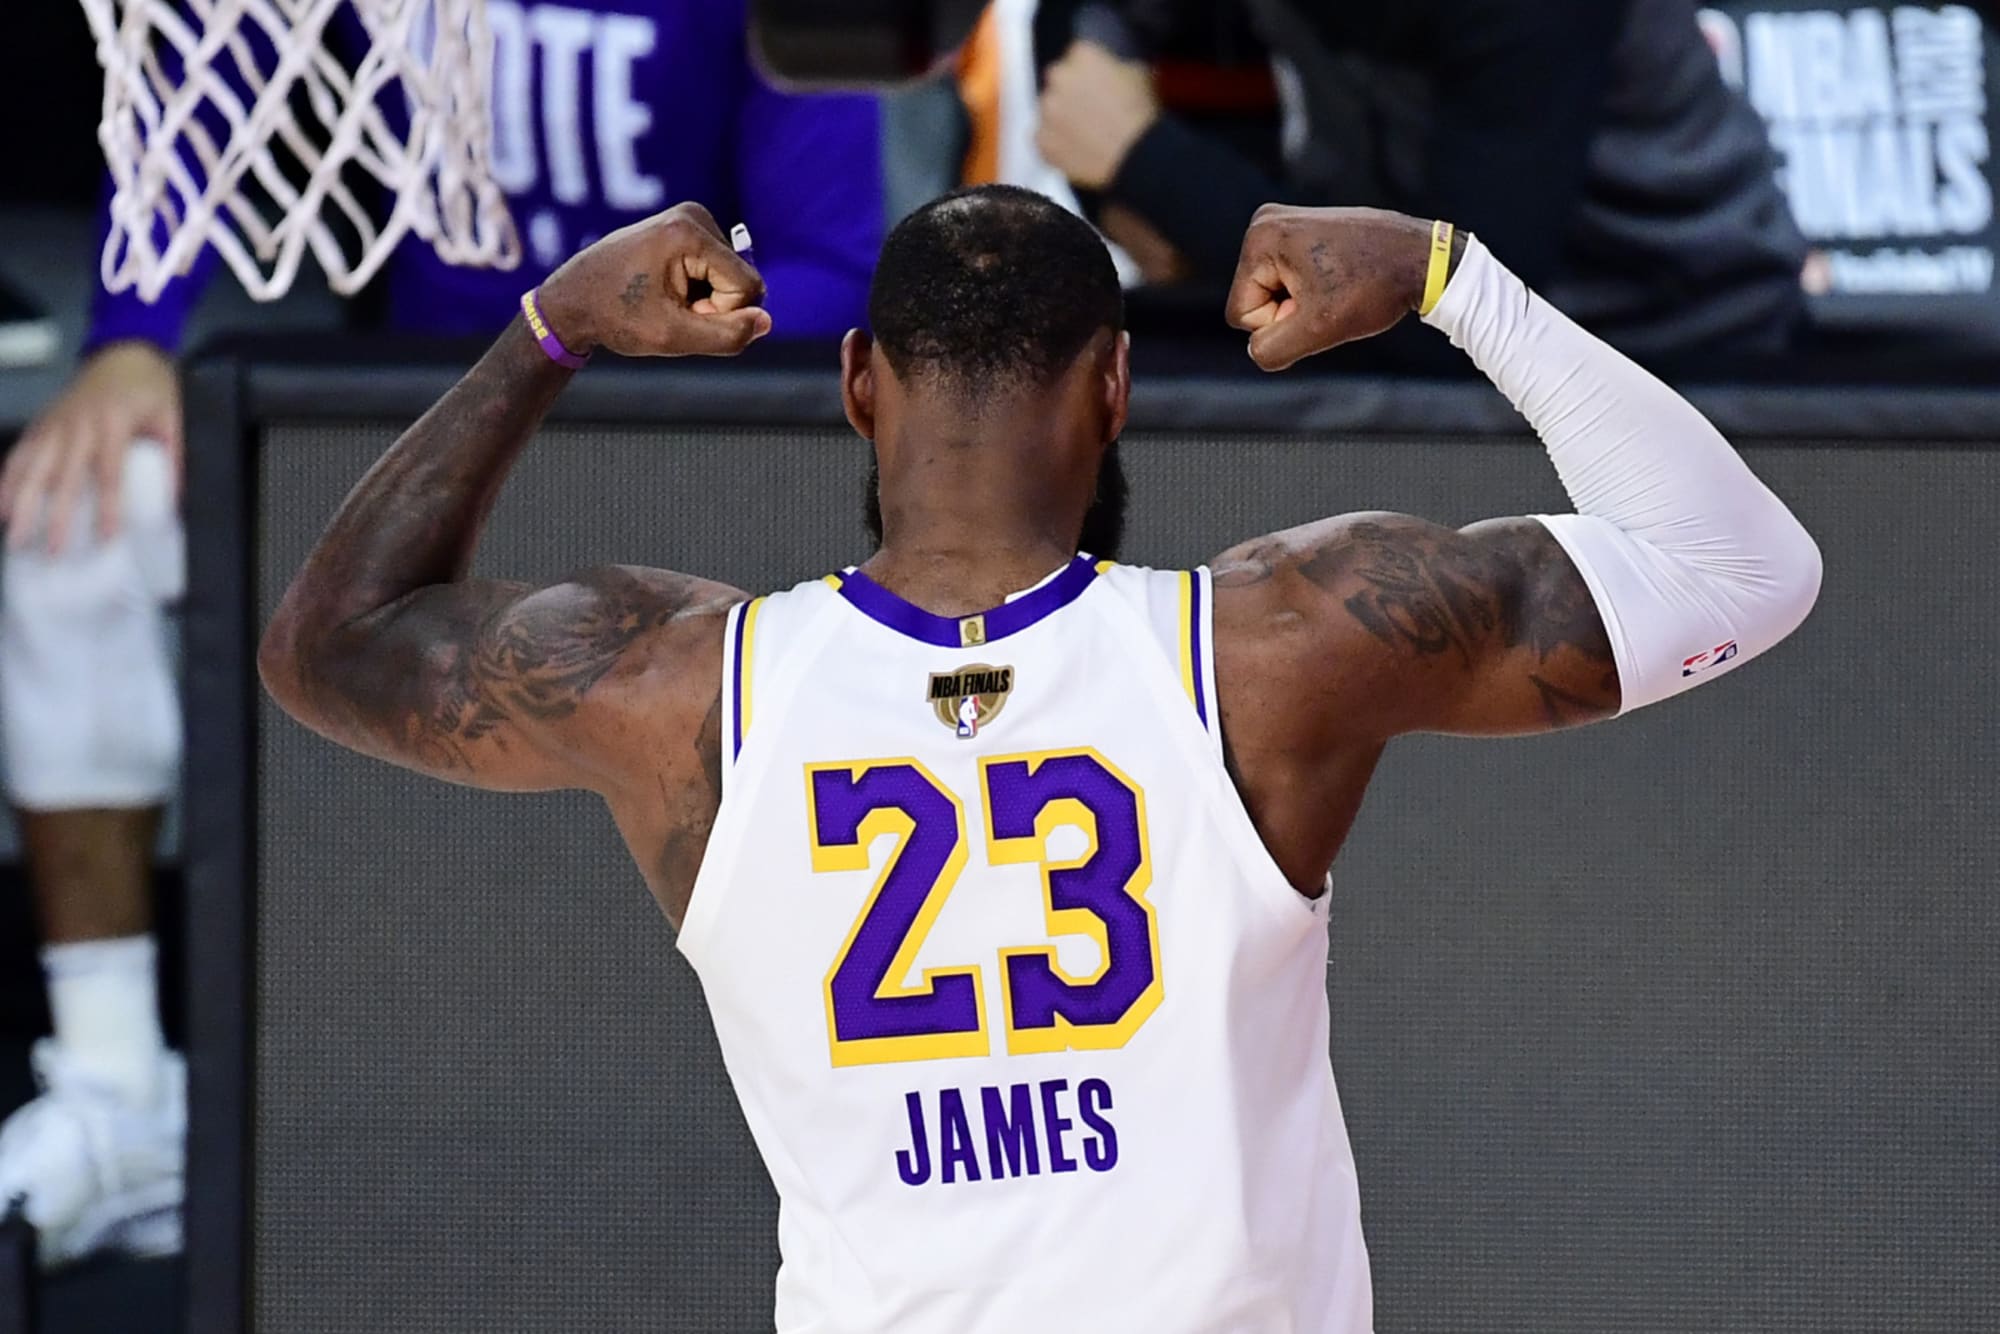 Los Angeles Lakers: Thanks to LeBron James, championship No. 17 is